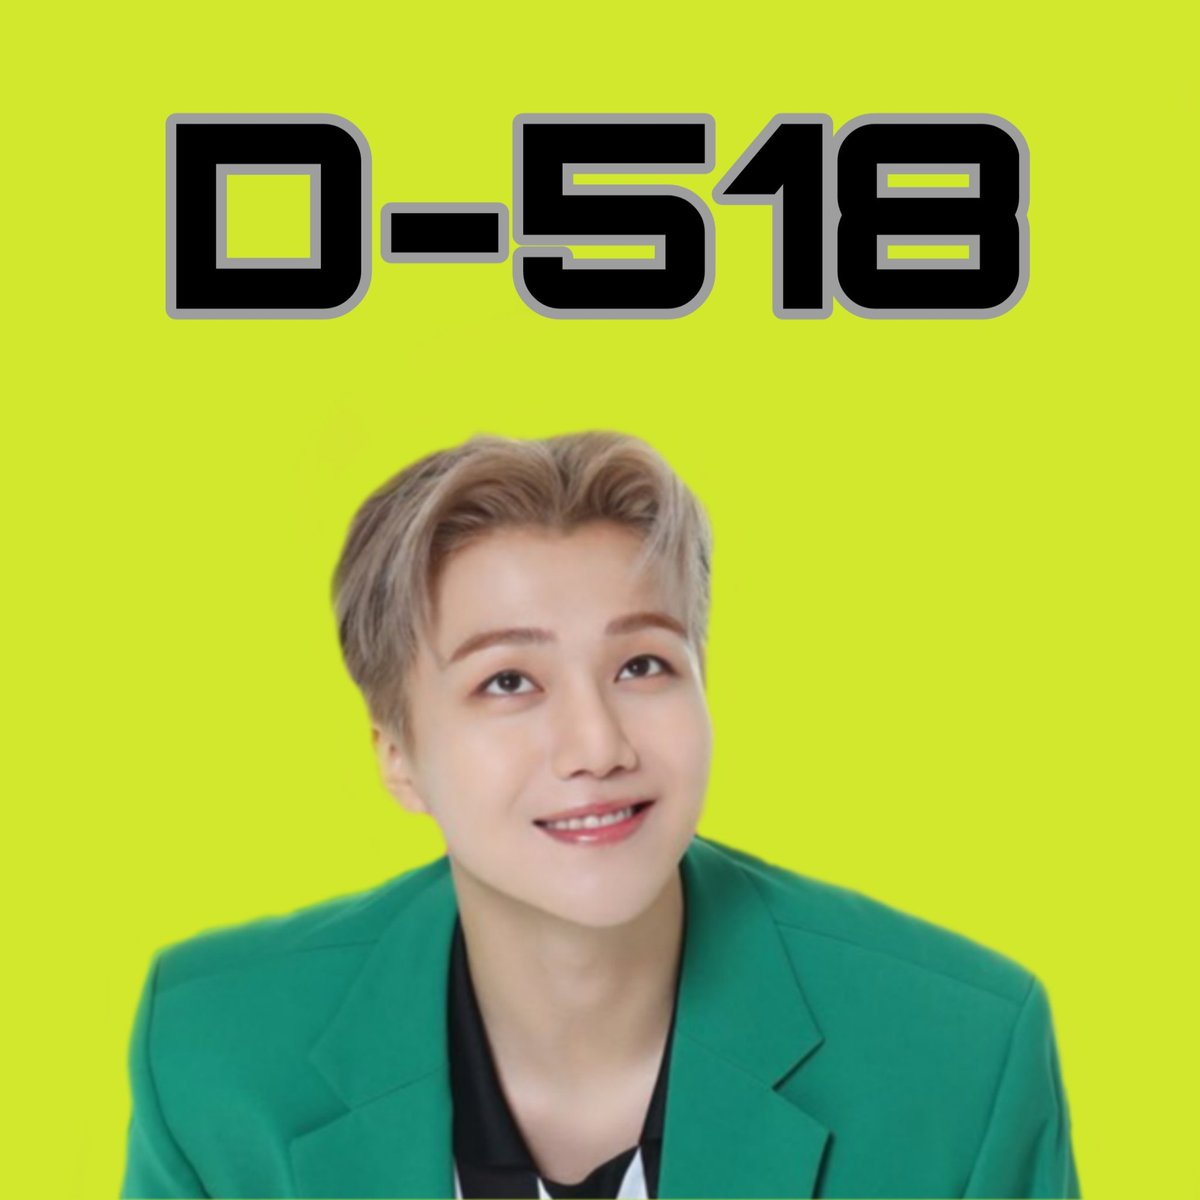 D-518- "Oooohhh I wanna hear your voice" Another busy sunday to stream. Everyone let's join the streaming party for Jinho. Enjoy, dont slip meals and have a nice day!   #PENTAGON  #JINHO  #펜타곤  #진호  @CUBE_PTG